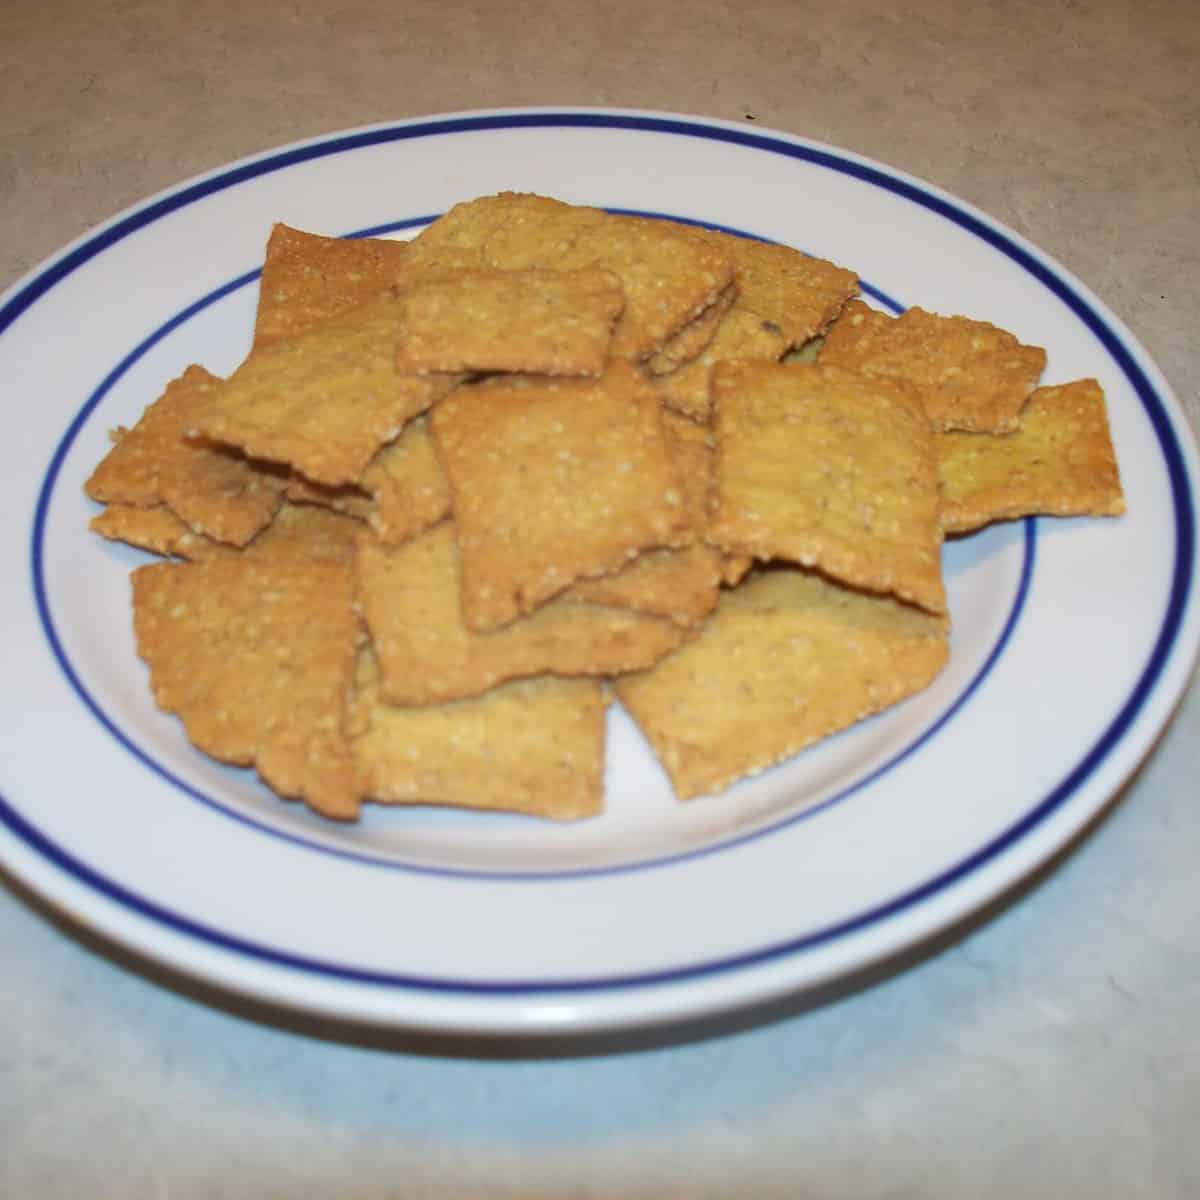  These savory crackers are made with wholesome chickpea flour and spices.